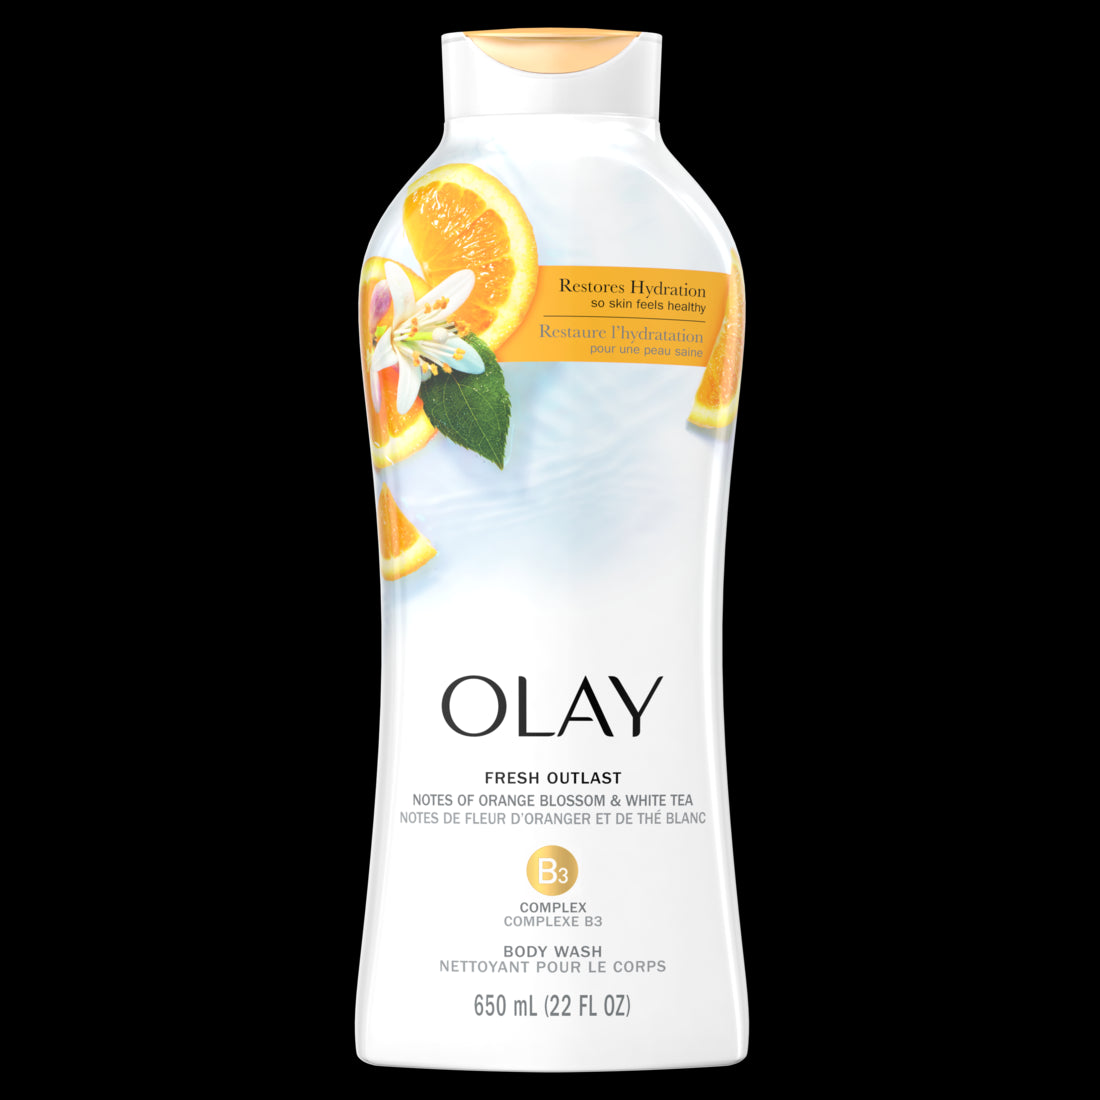 Olay Fresh Outlast Body Wash with Notes of Orange Blossom and White Tea - 22oz/4pk